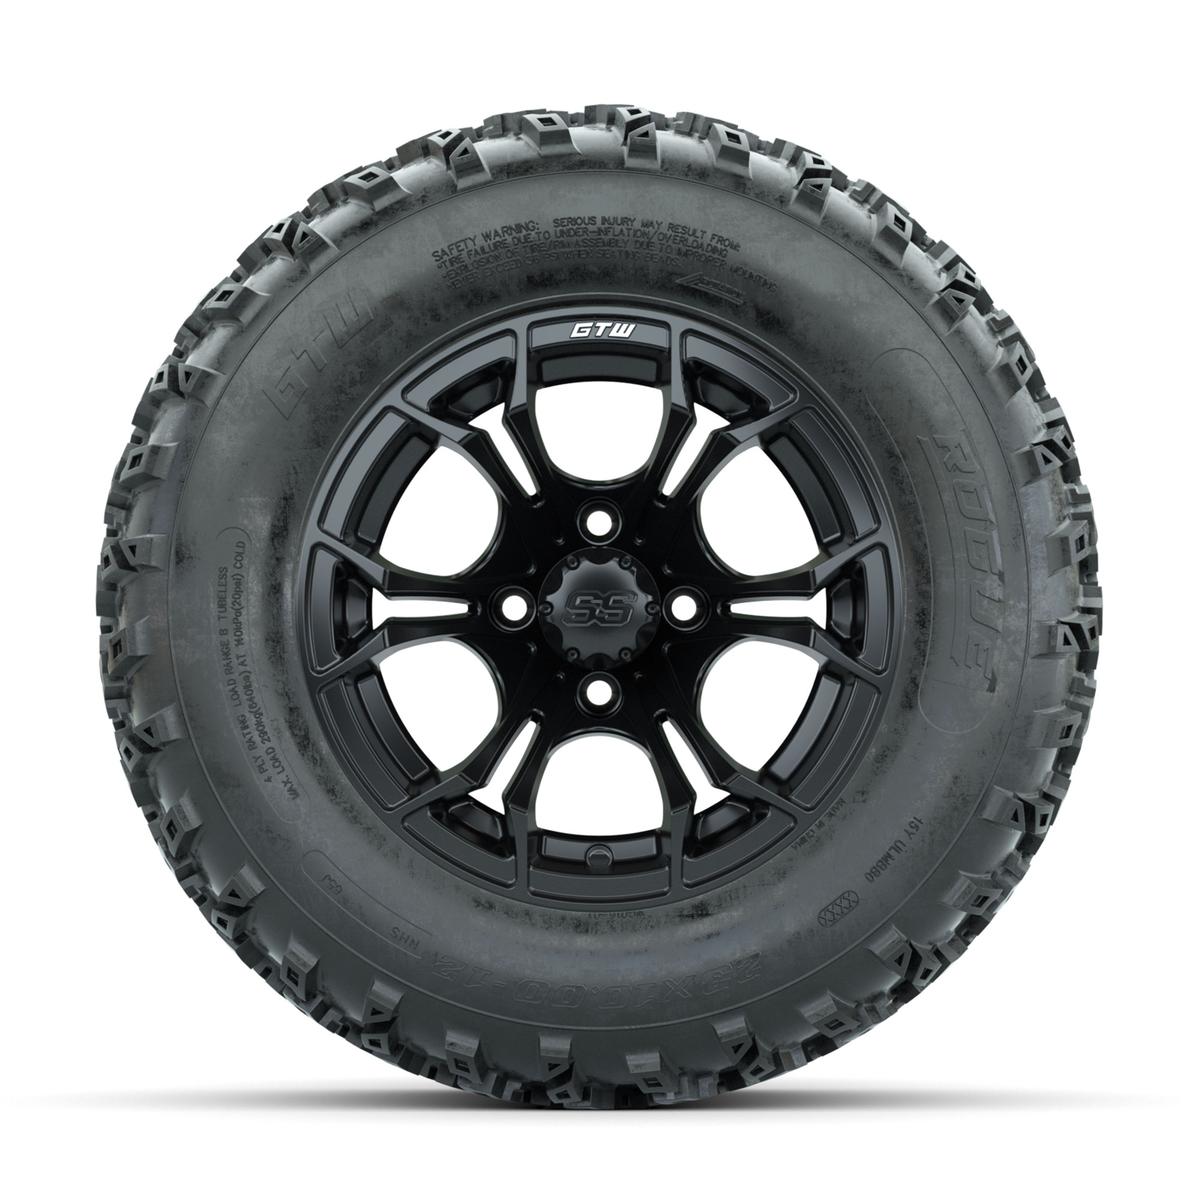 GTW Spyder Matte Black 12 in Wheels with 23x10.00-12 Rogue All Terrain Tires – Full Set